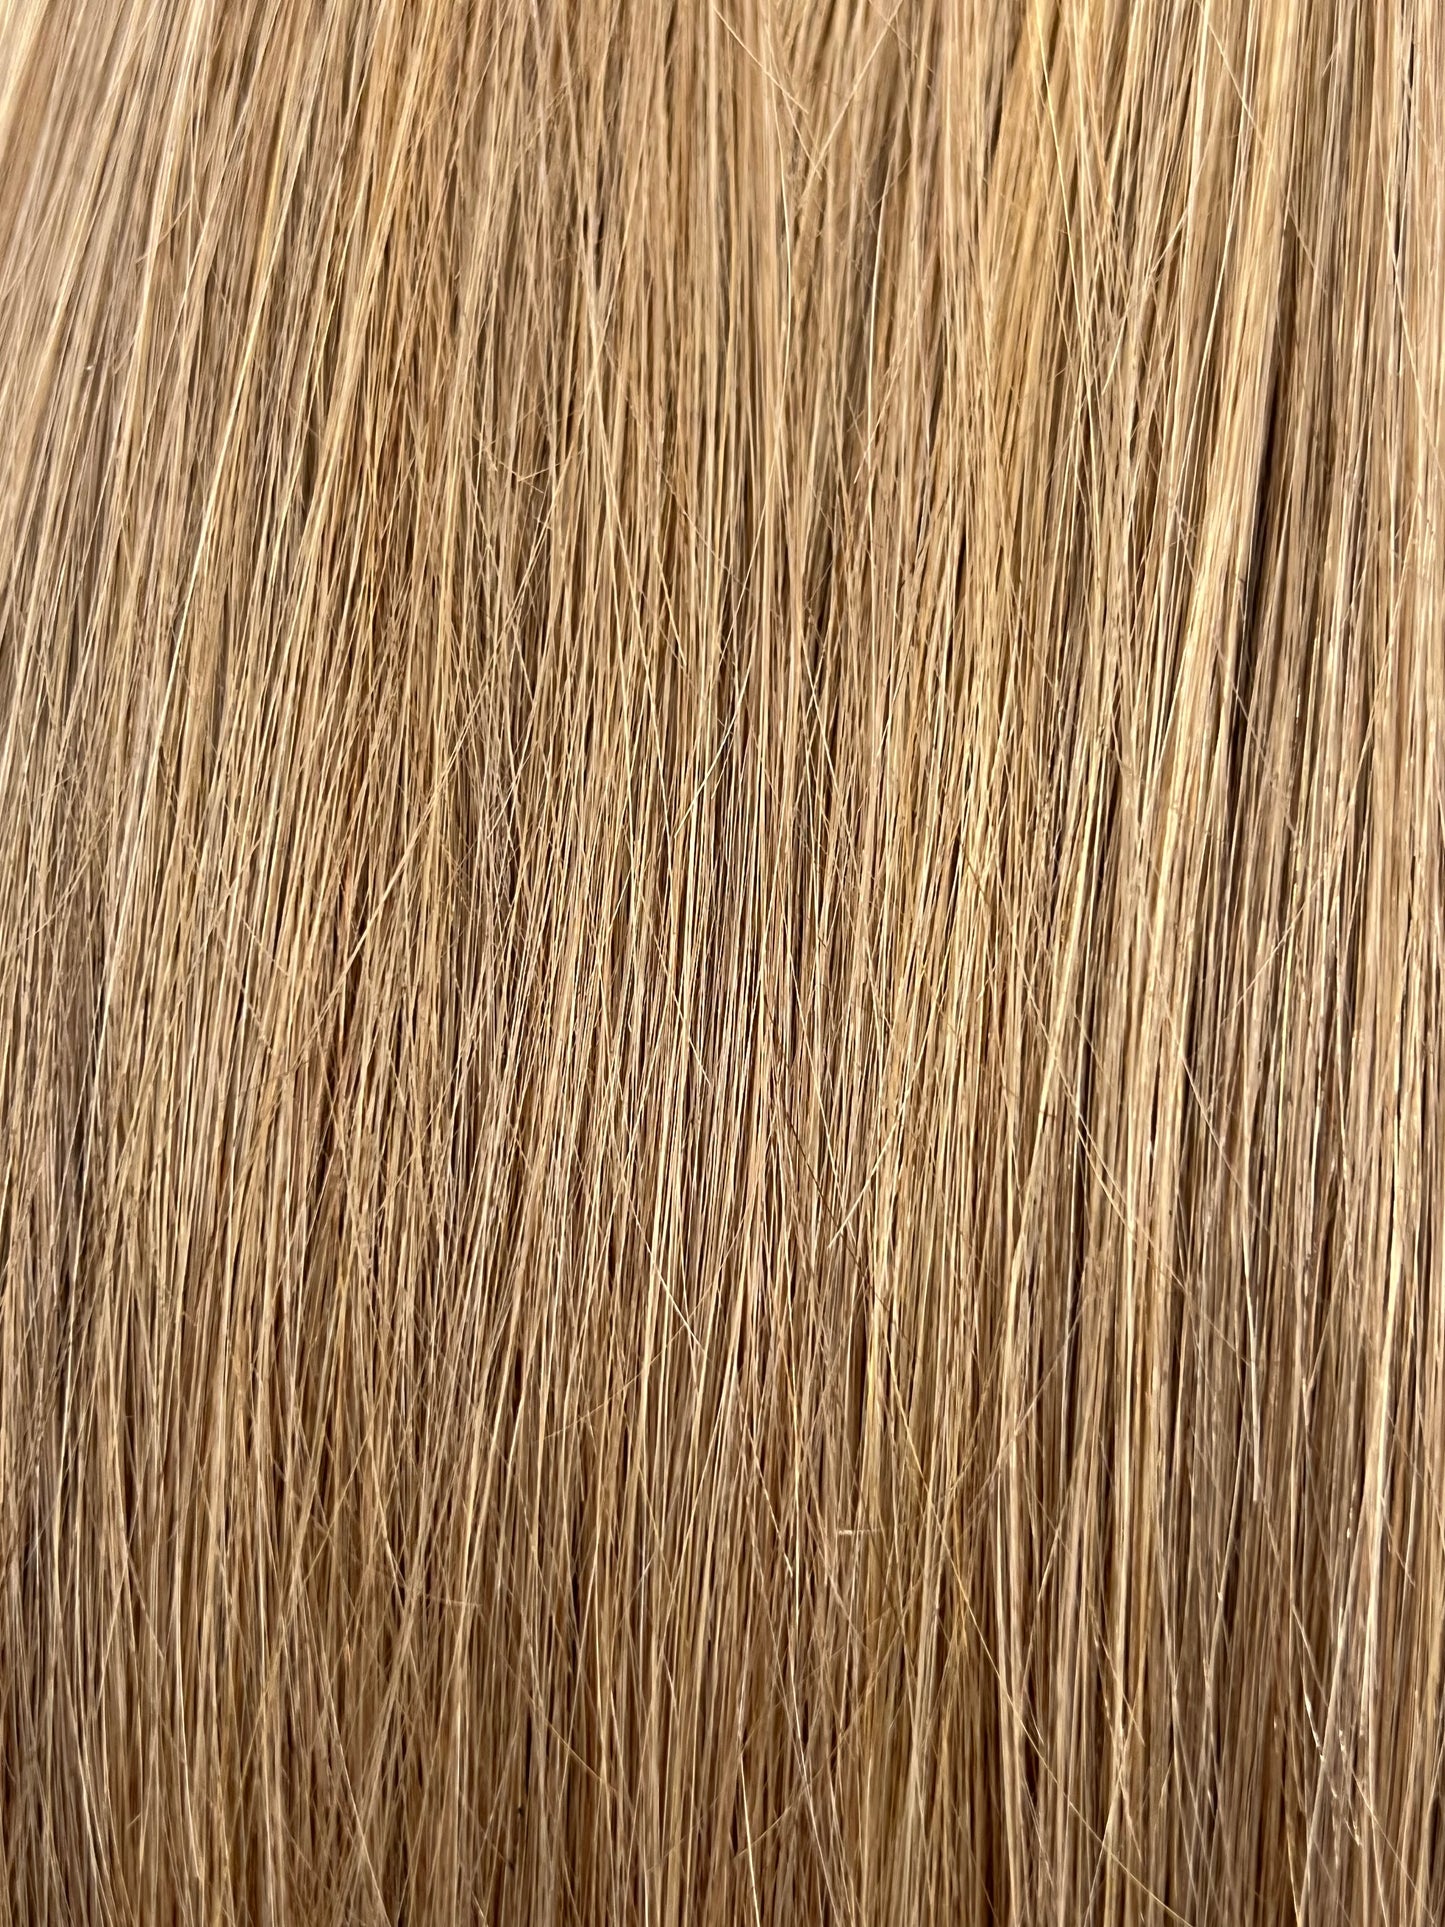 CLEARANCE OCCASSIONAL CLIP INS-18/8 Honey Blonde and Dark Golden Blonde 20 INCH 150 GRAMS